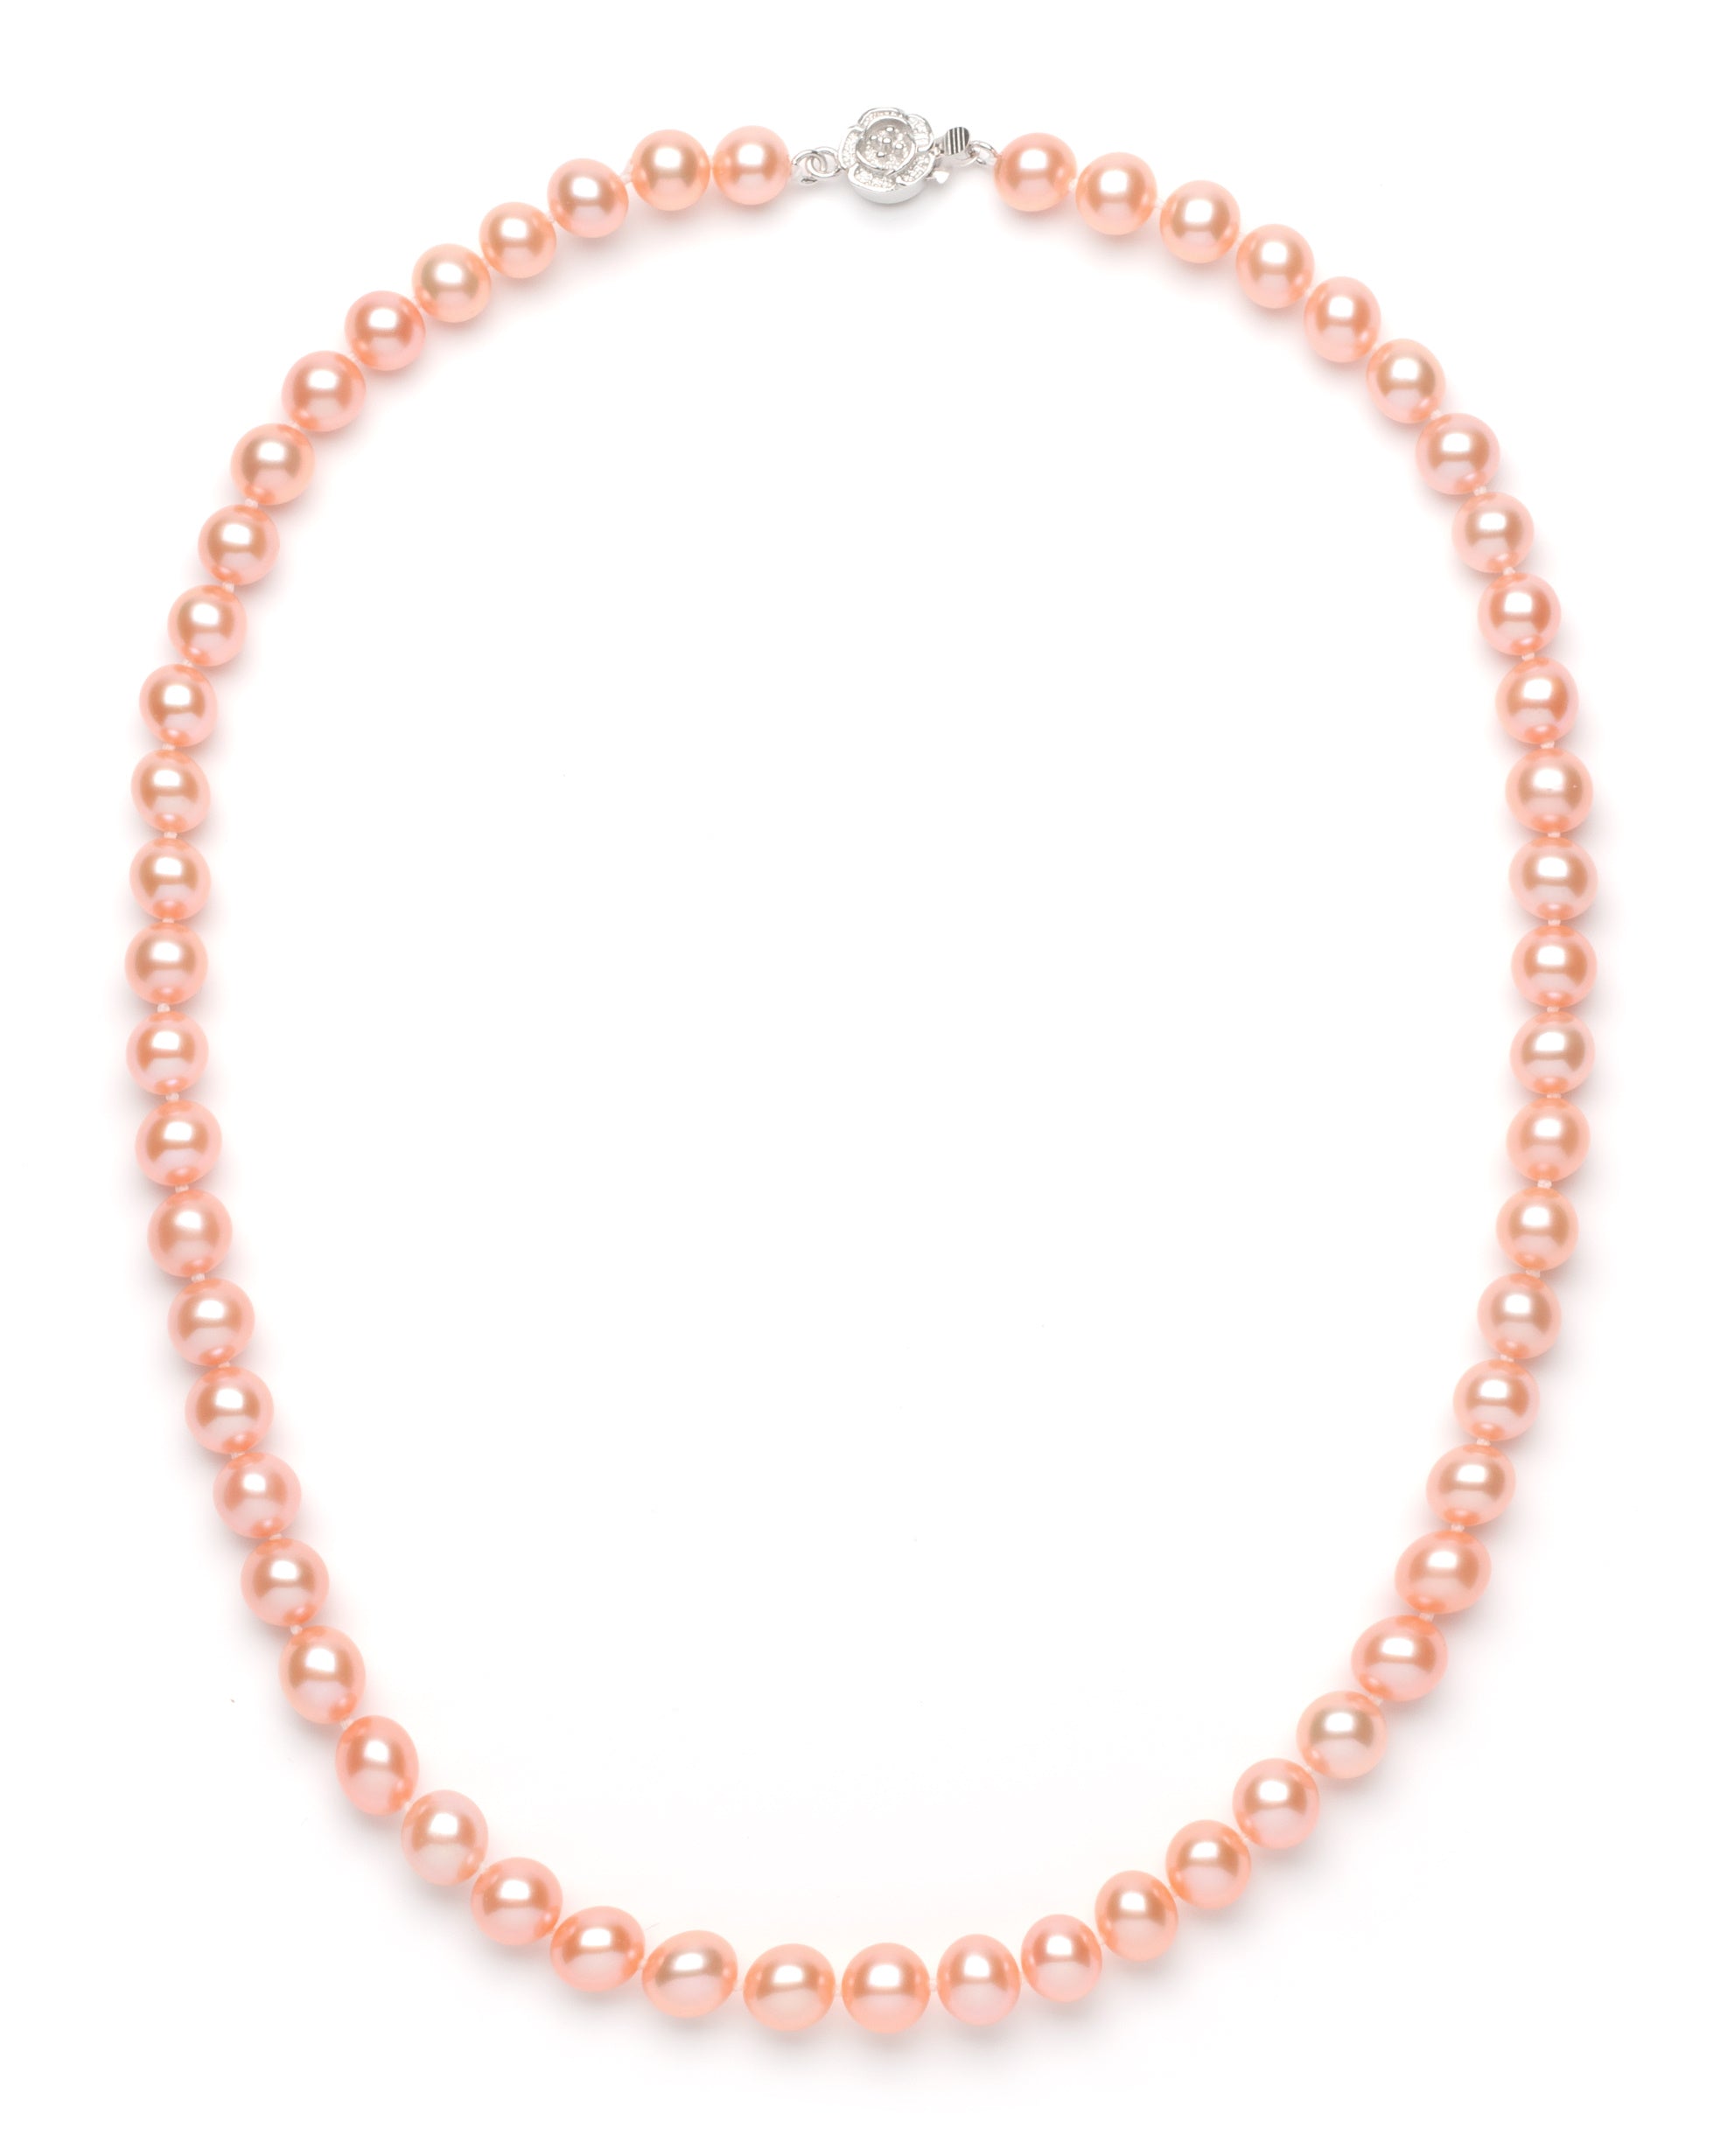 Necklace/Earrings Set 8.0-9.0 mm Pink Freshwater Pearls